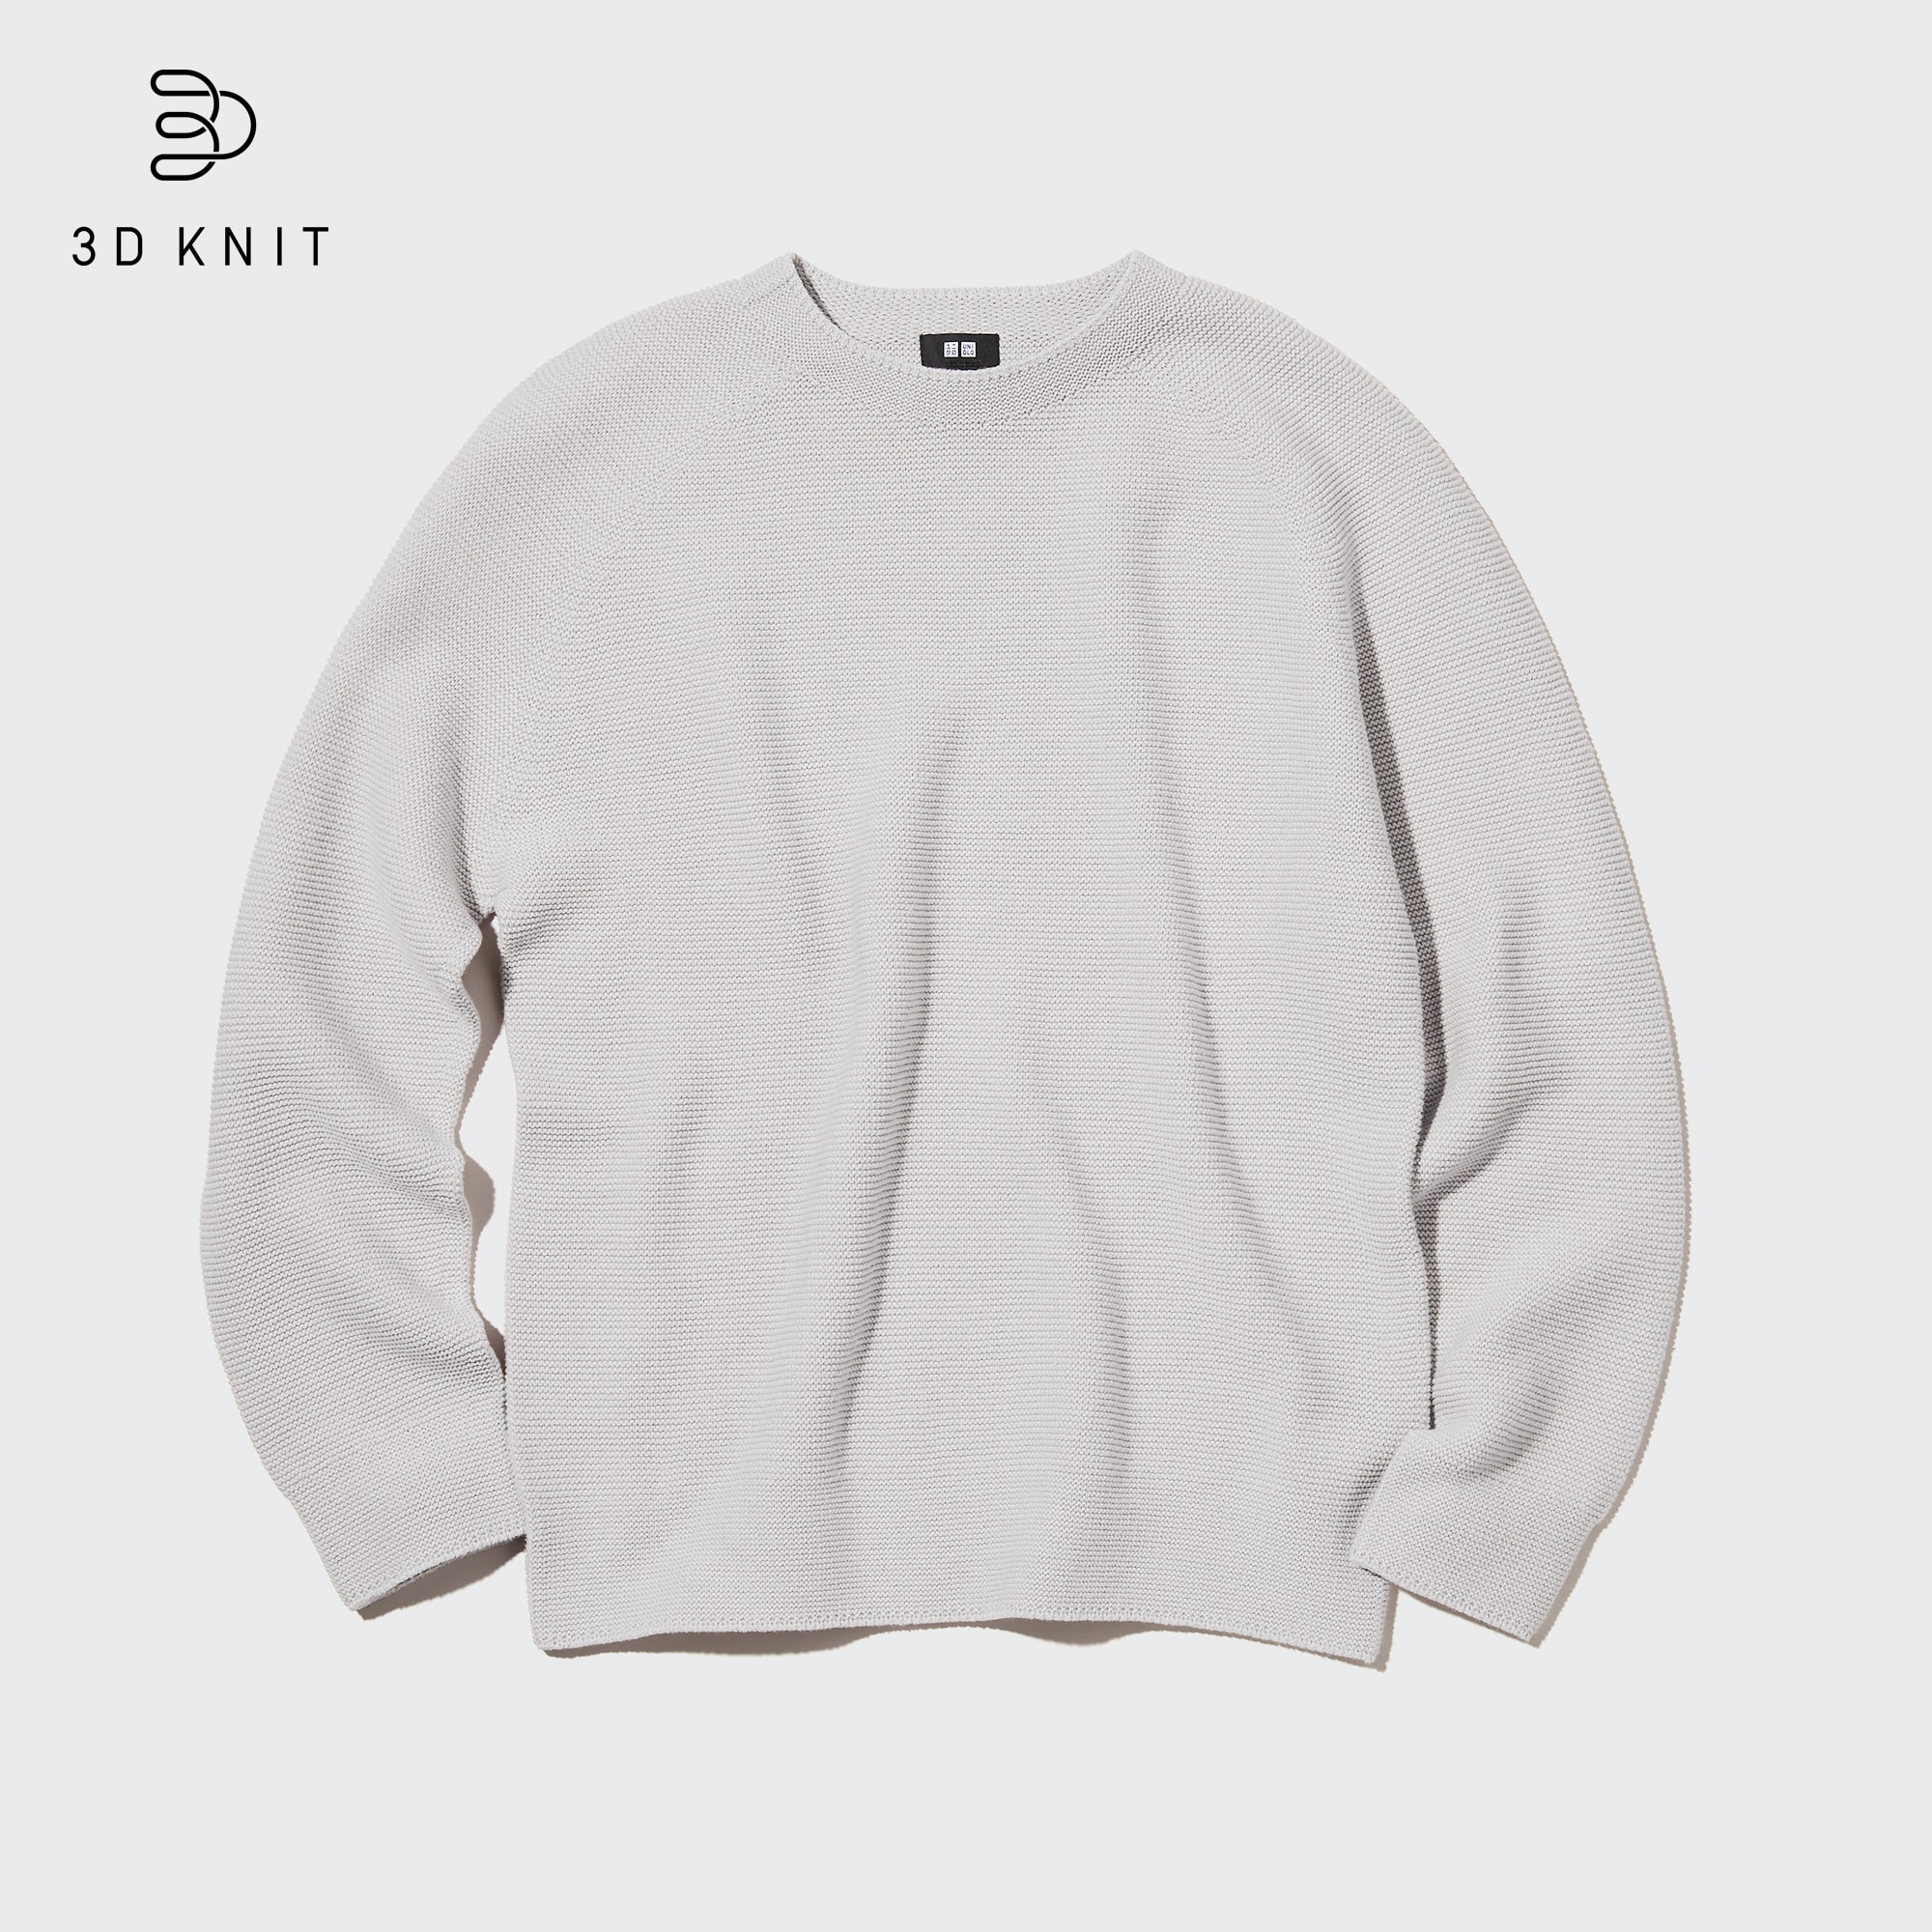 UNIQLO 3D Knit Crew Neck Long-Sleeve Sweater | StyleHint